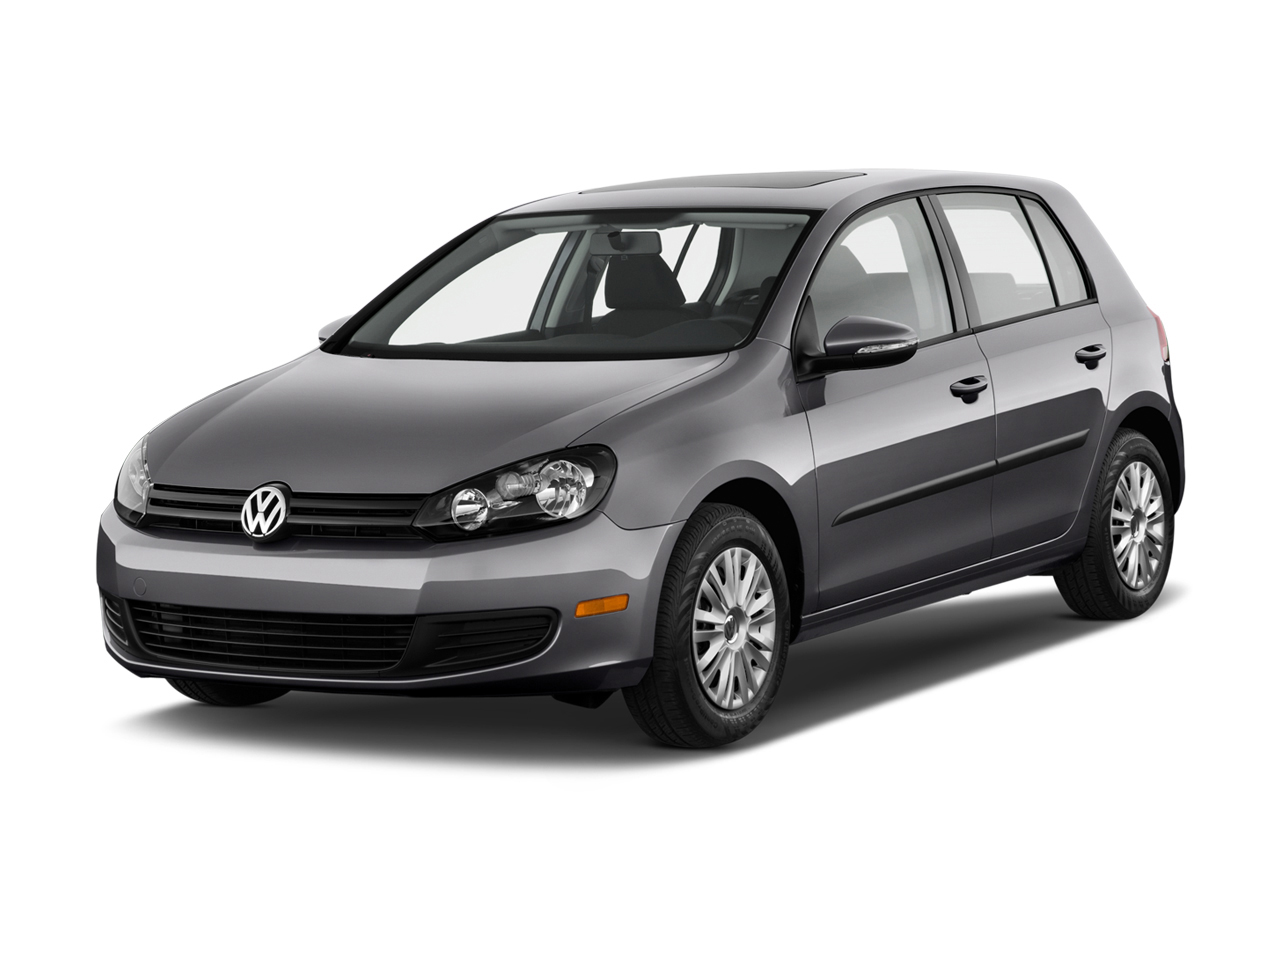 2013 Volkswagen Golf (VW) Review, Ratings, Specs, Prices, Photos The Car Connection